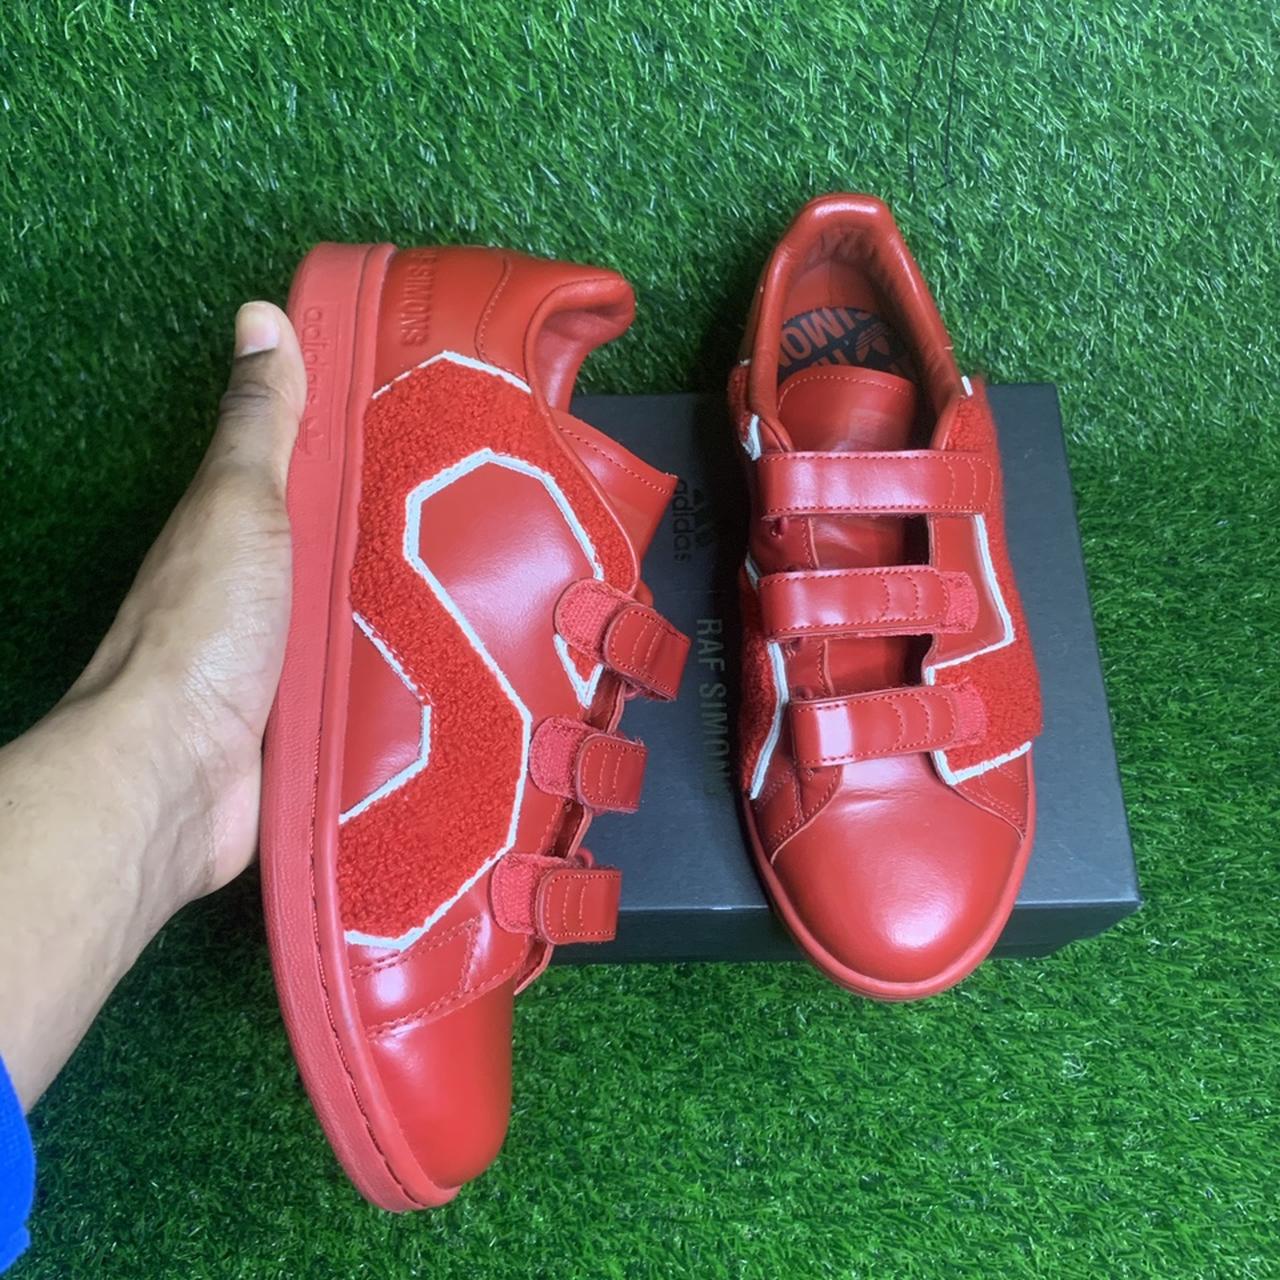 Raf Simons Men's Red Trainers (2)